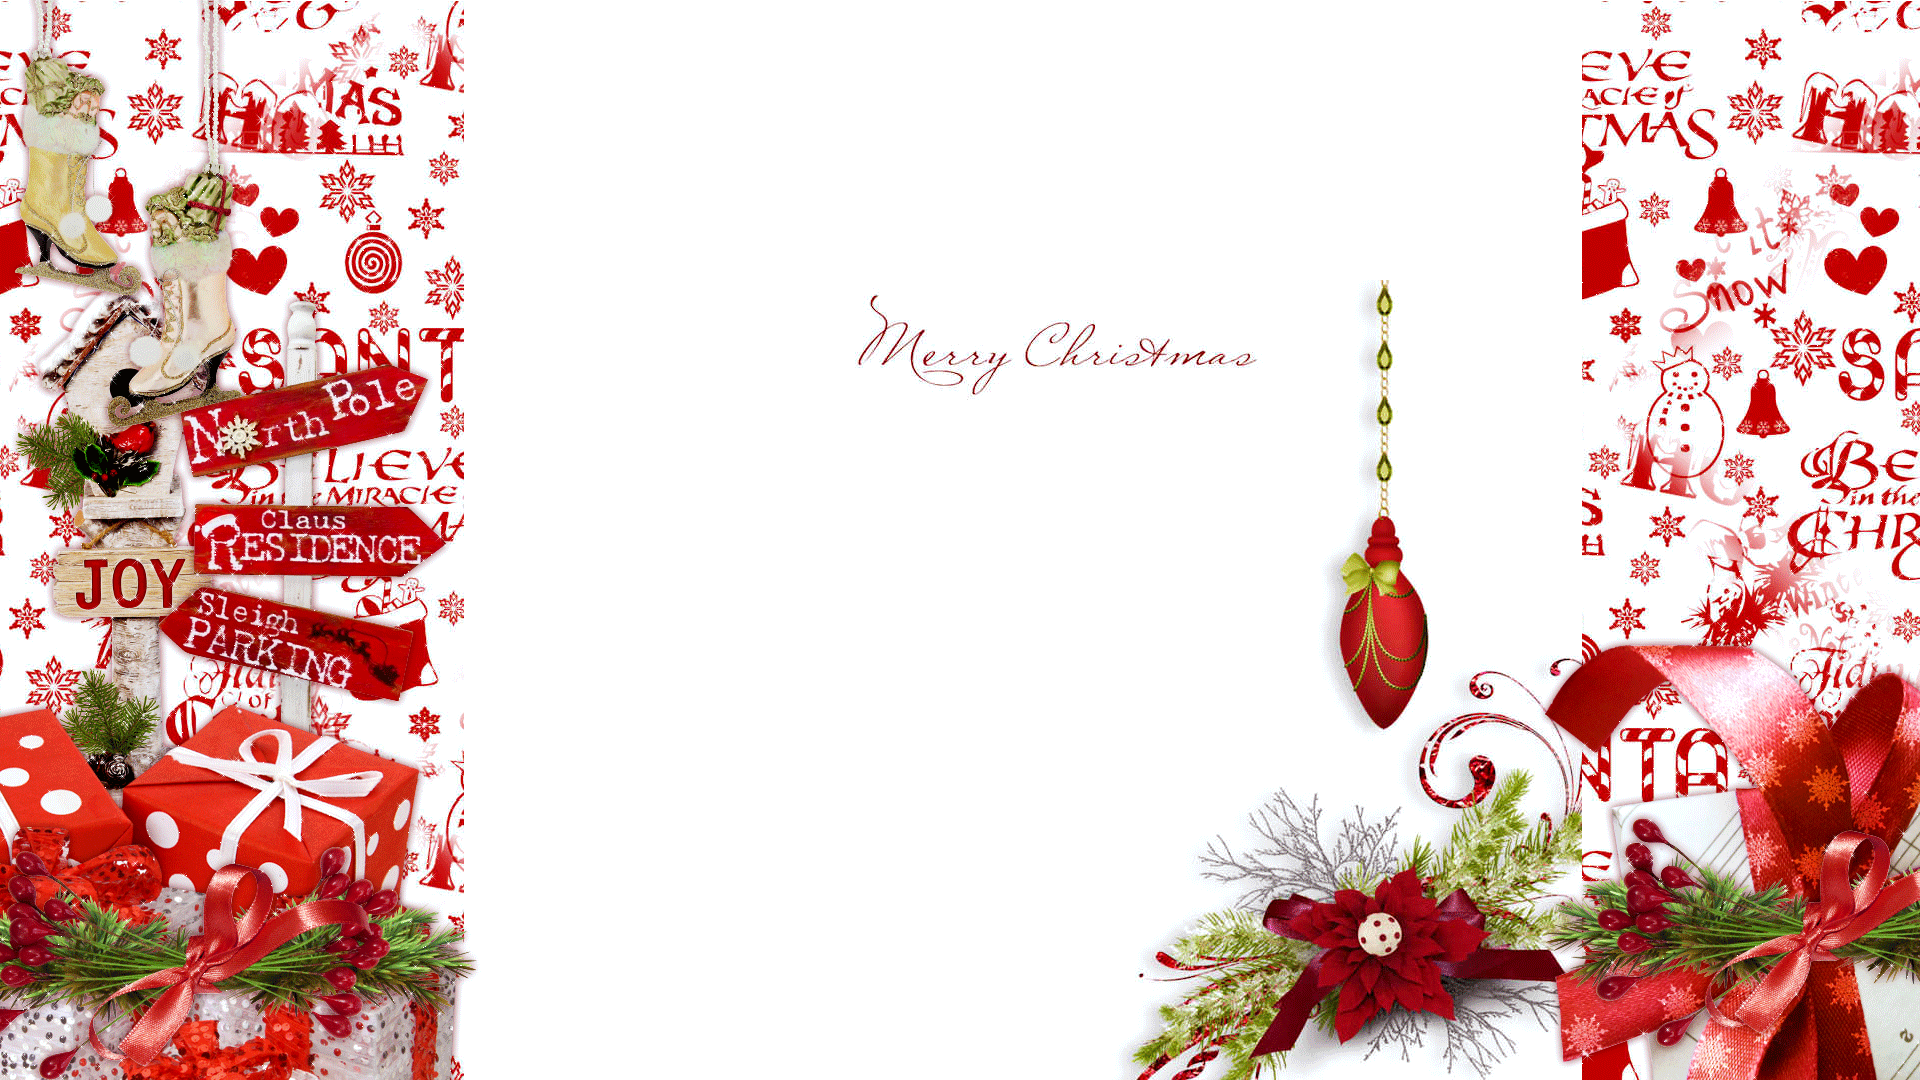 Full Size Christmas Background by Gina-101-Creative on DeviantArt